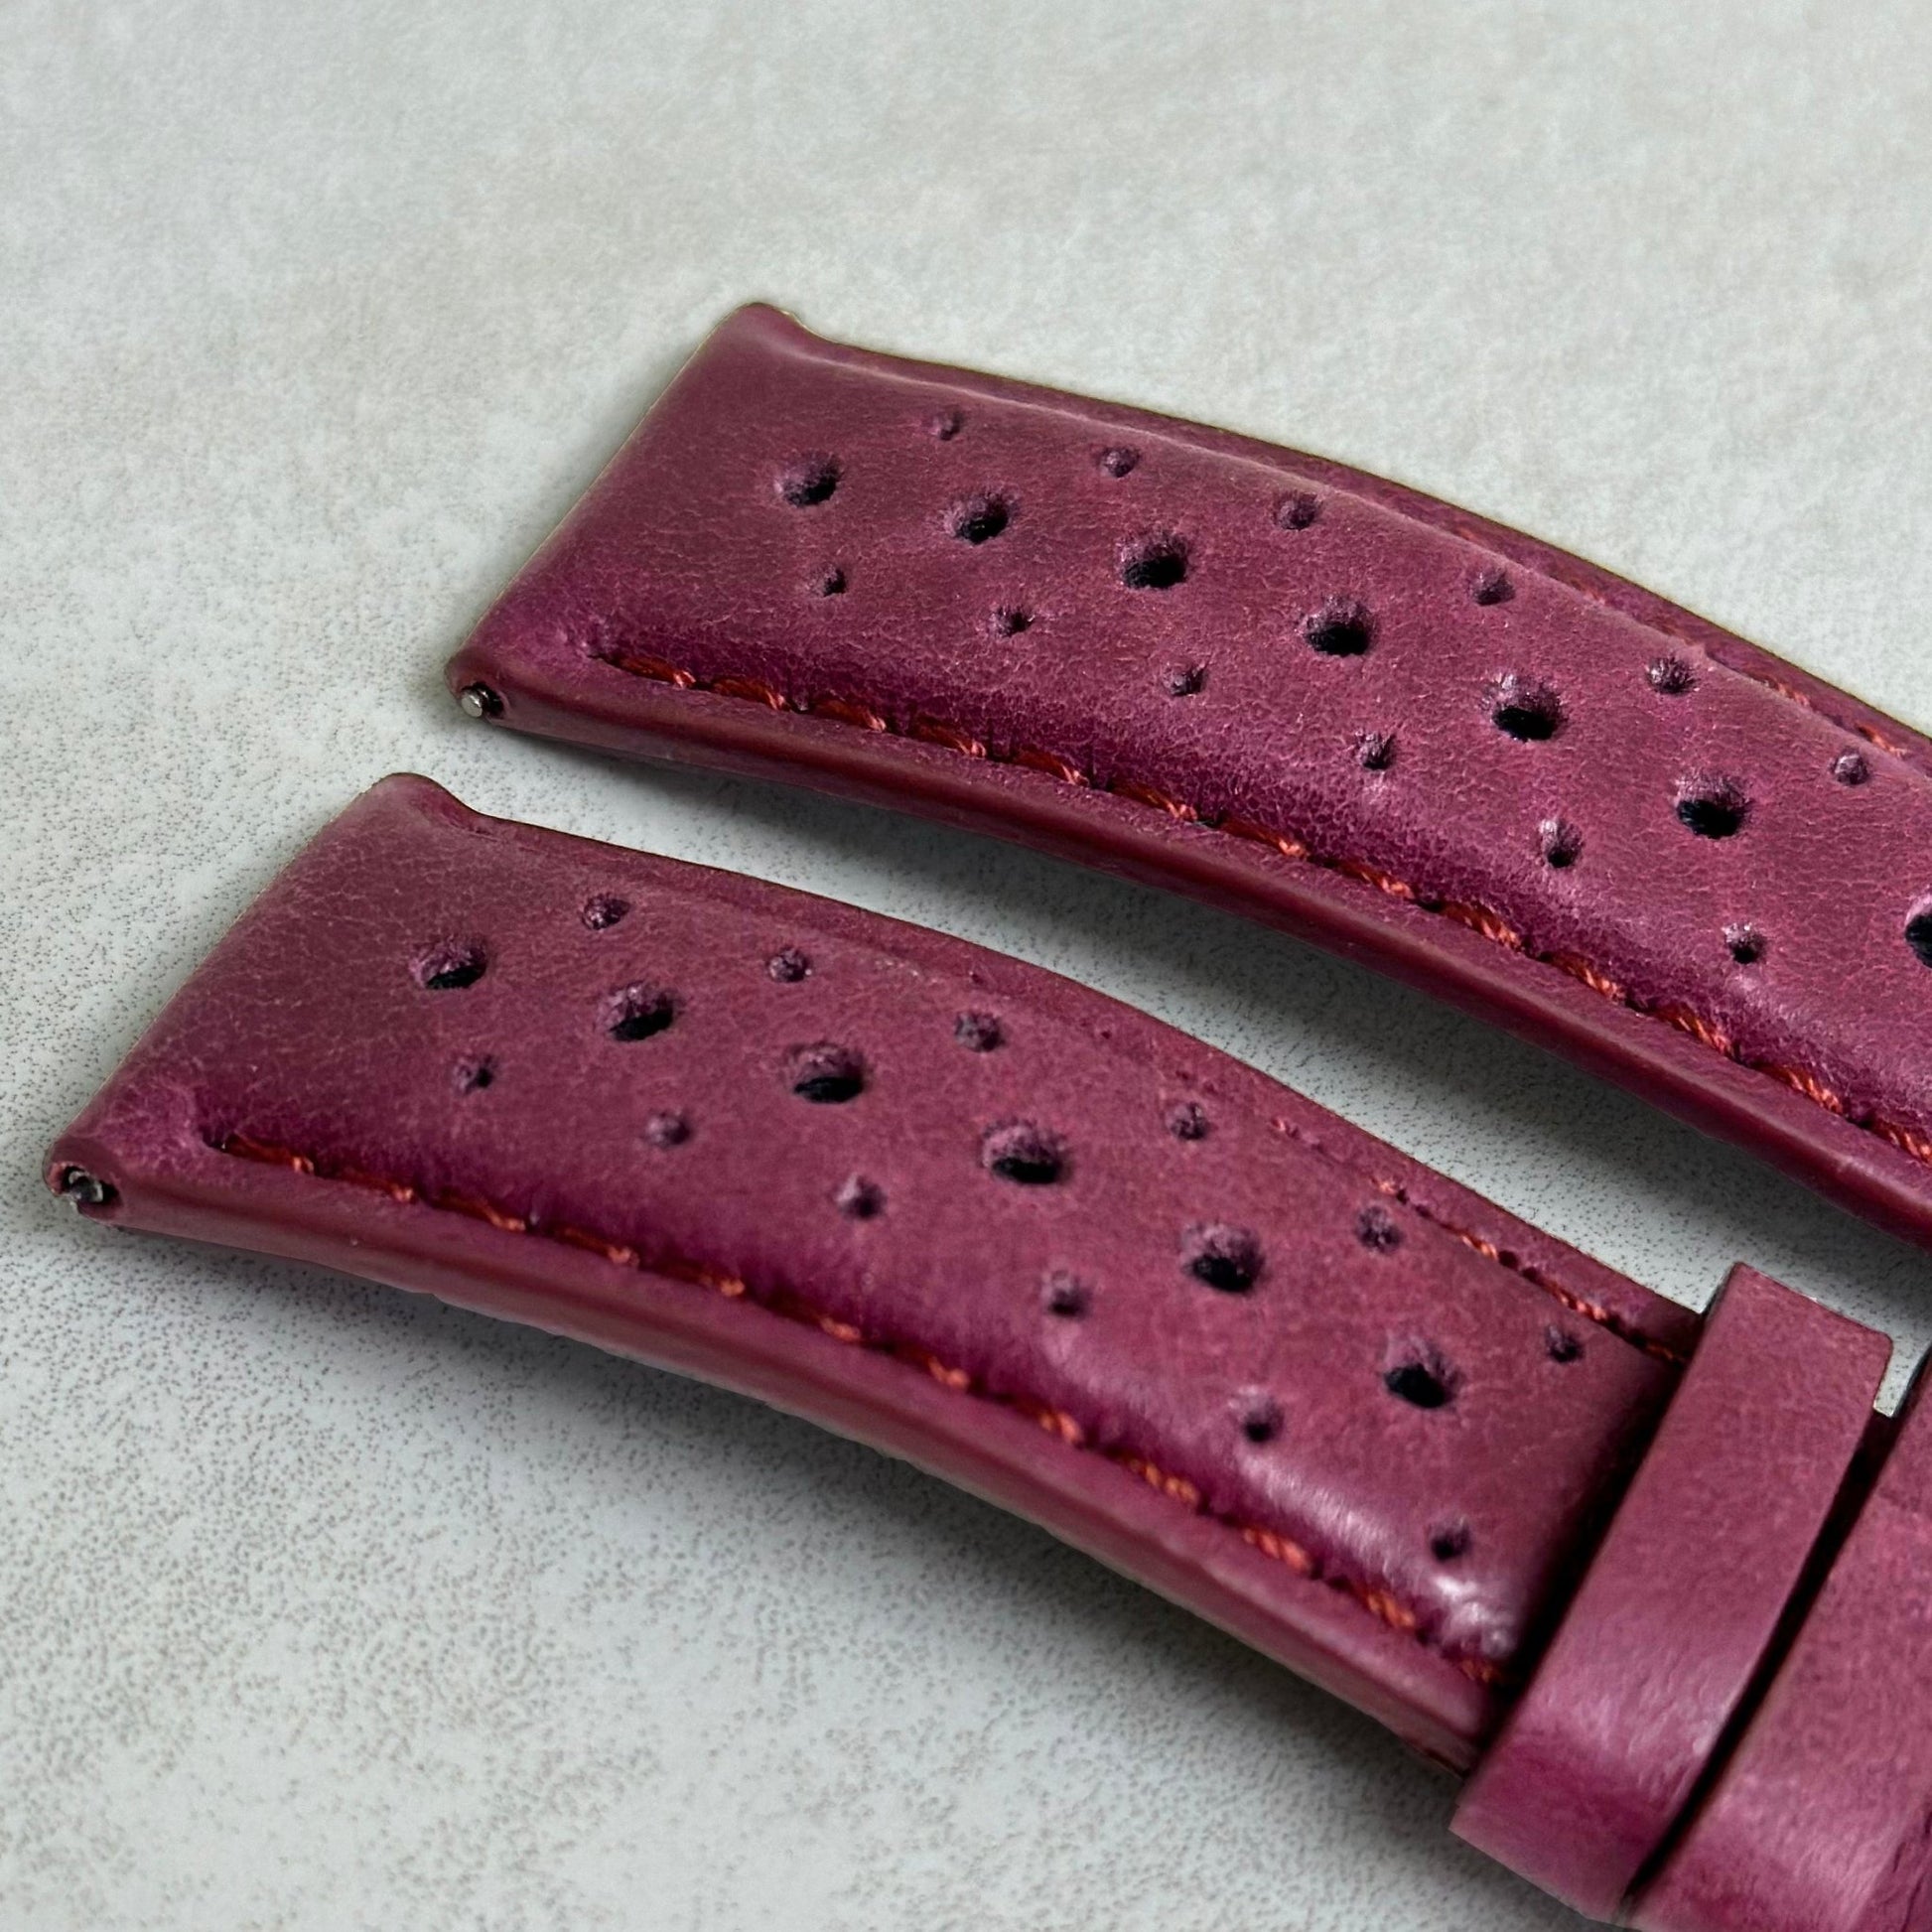 Top of the Montecarlo plum purple full grain leather watch strap. Perforated leather. Watch And Strap.